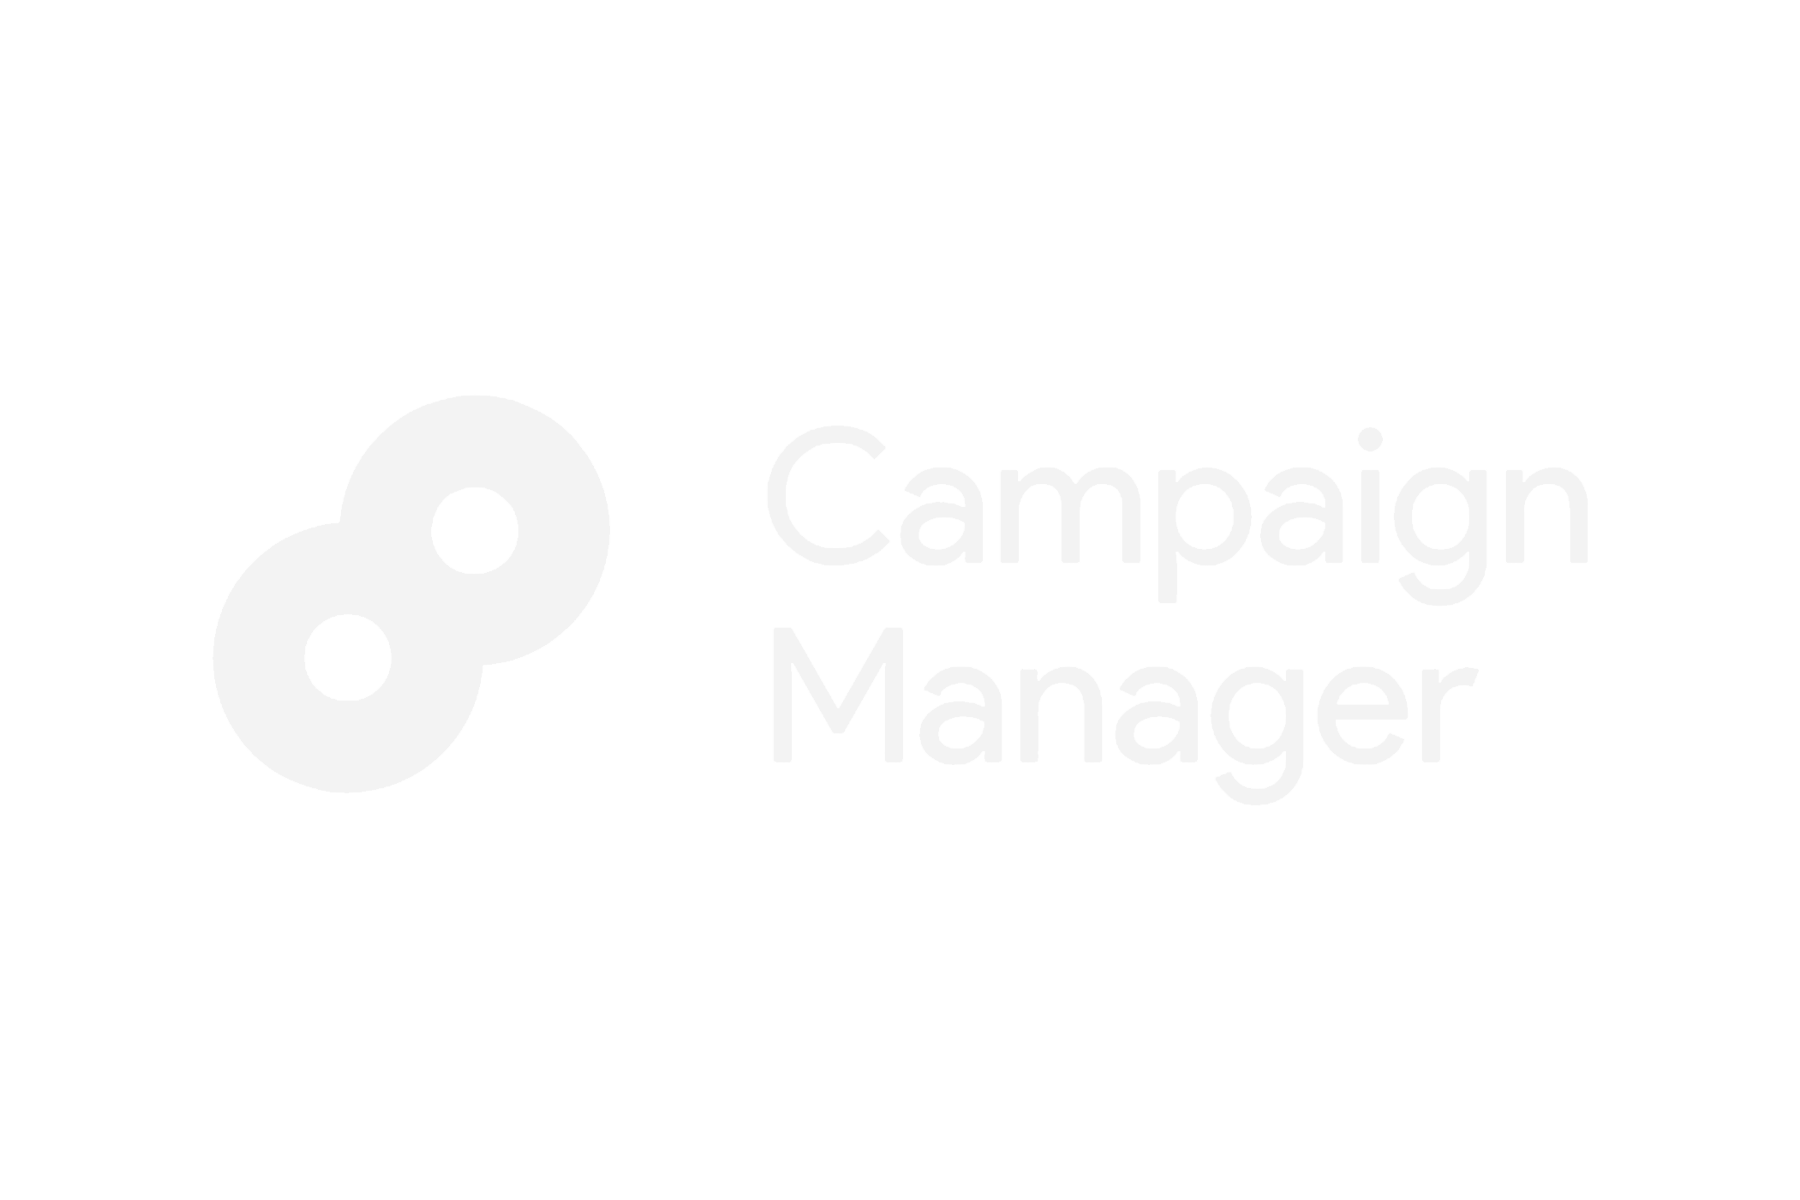 Campaign Manager